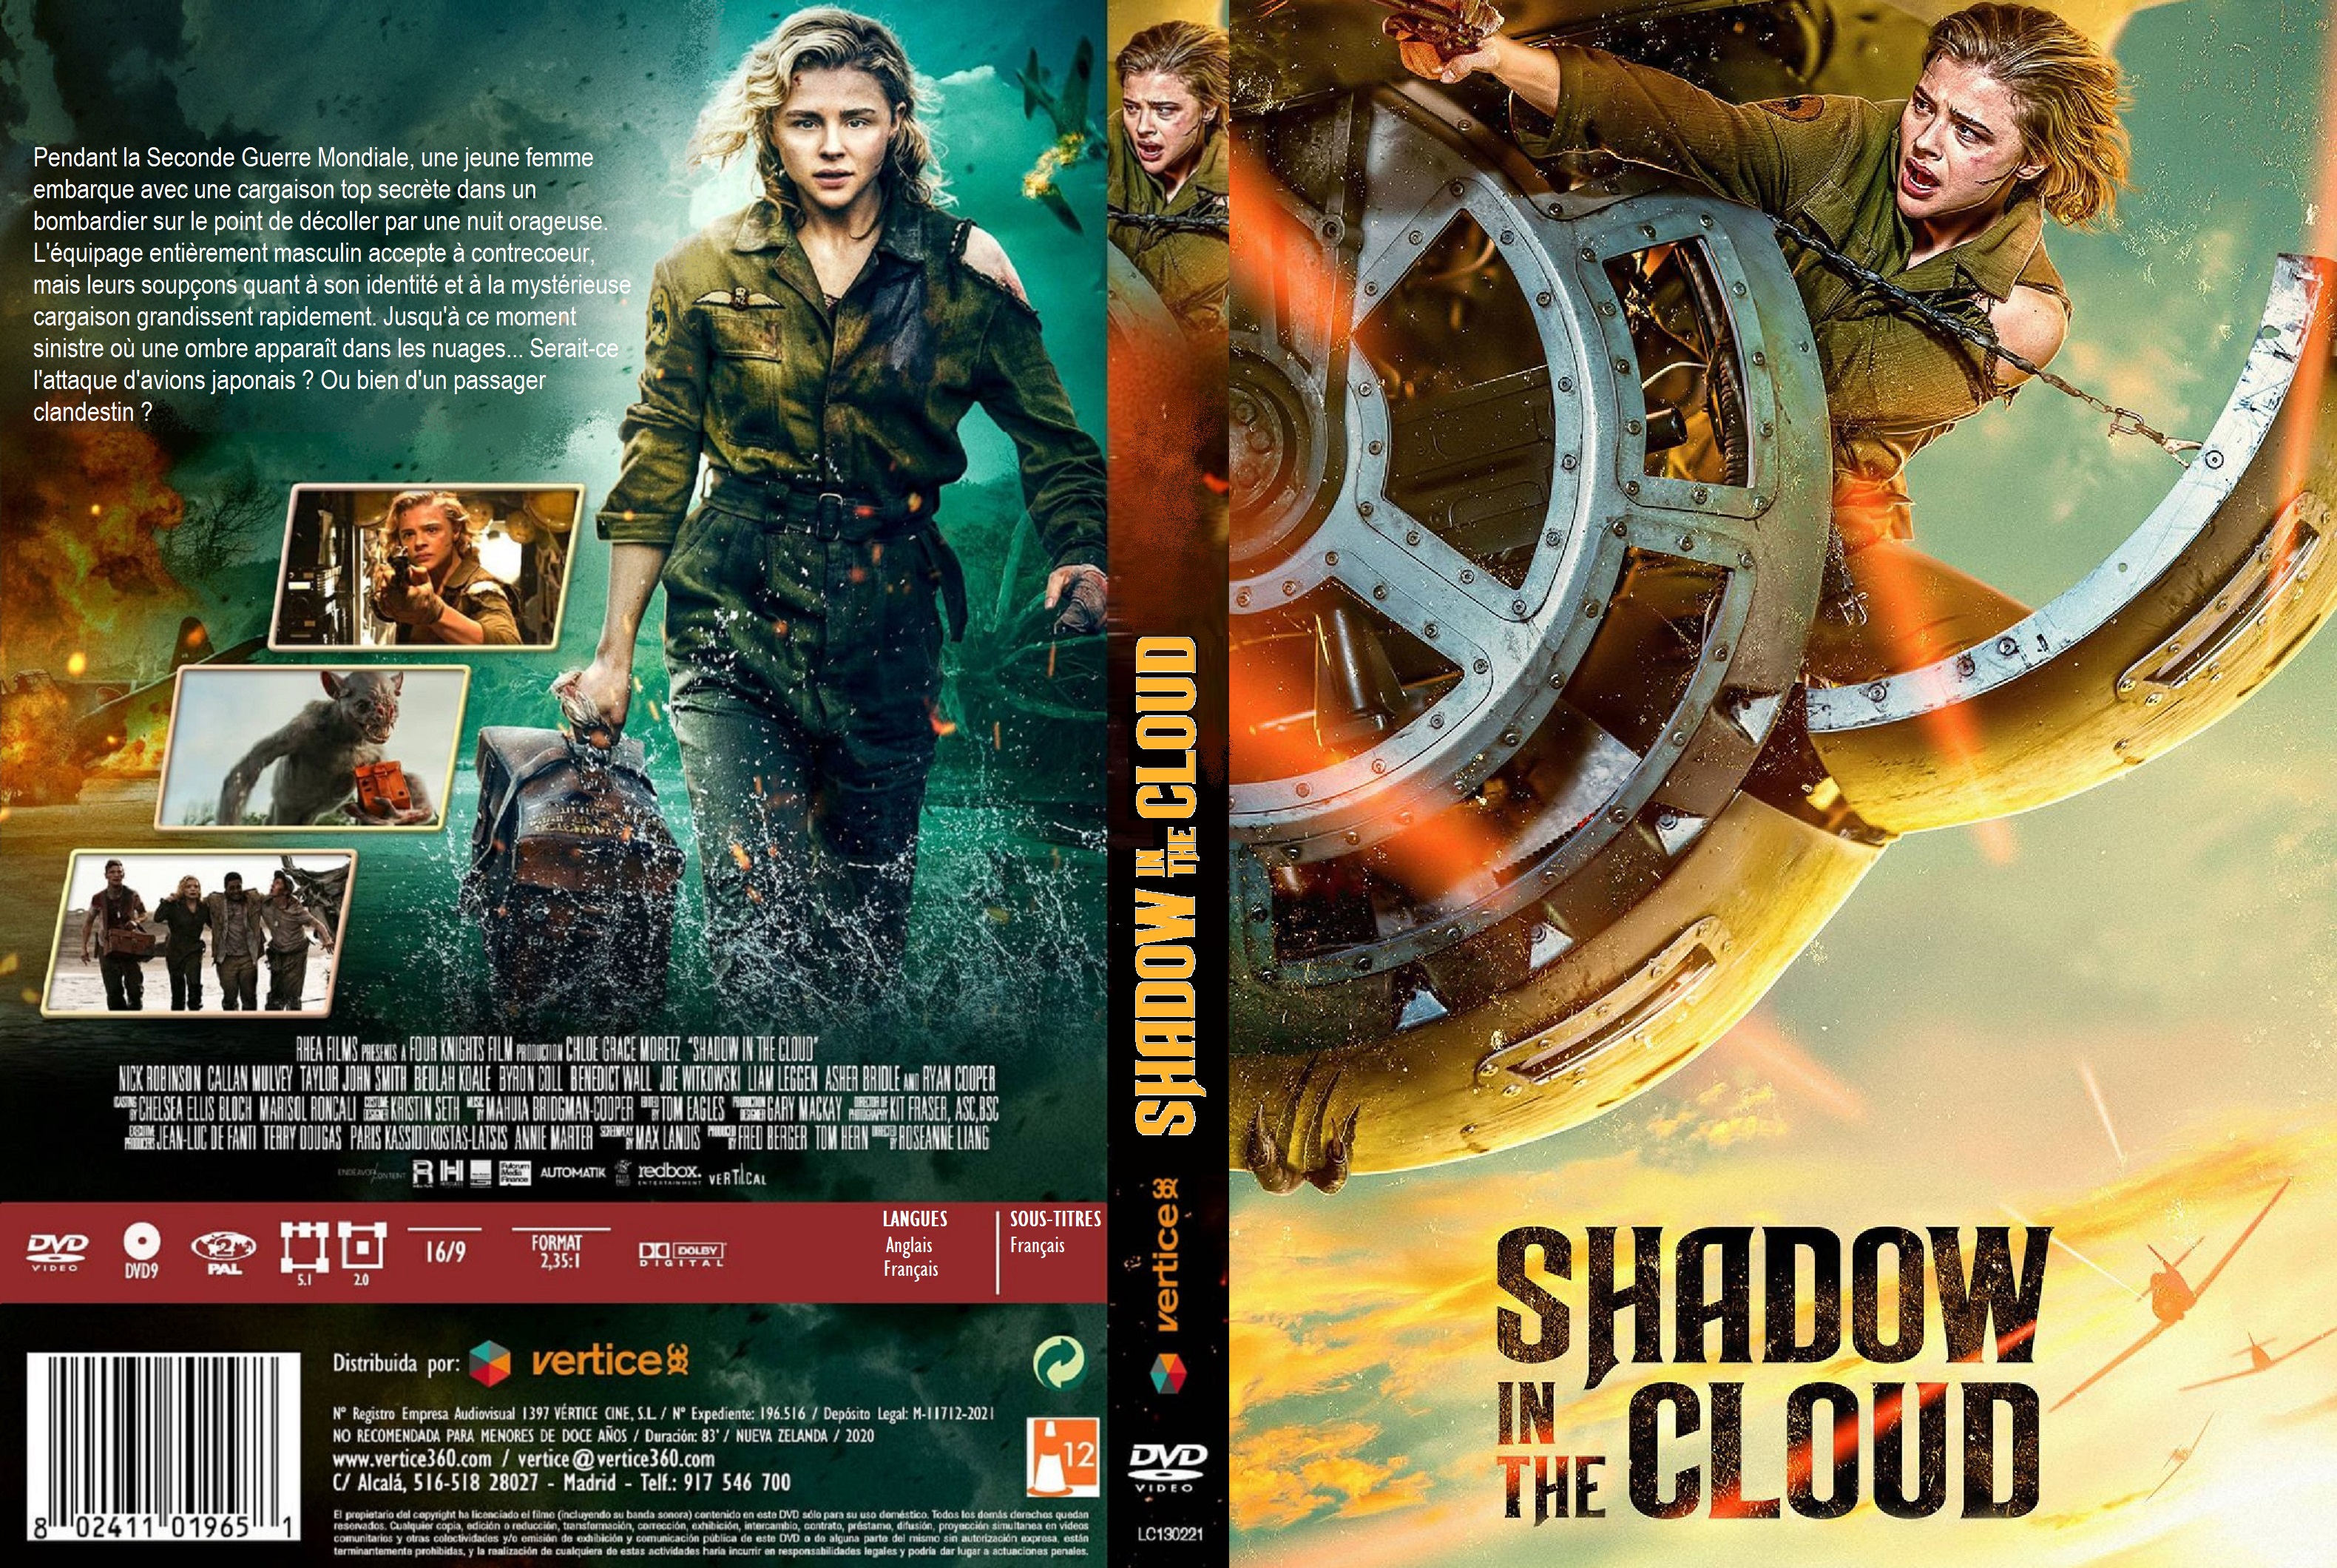 Jaquette DVD Shadow in the cloud custom v2